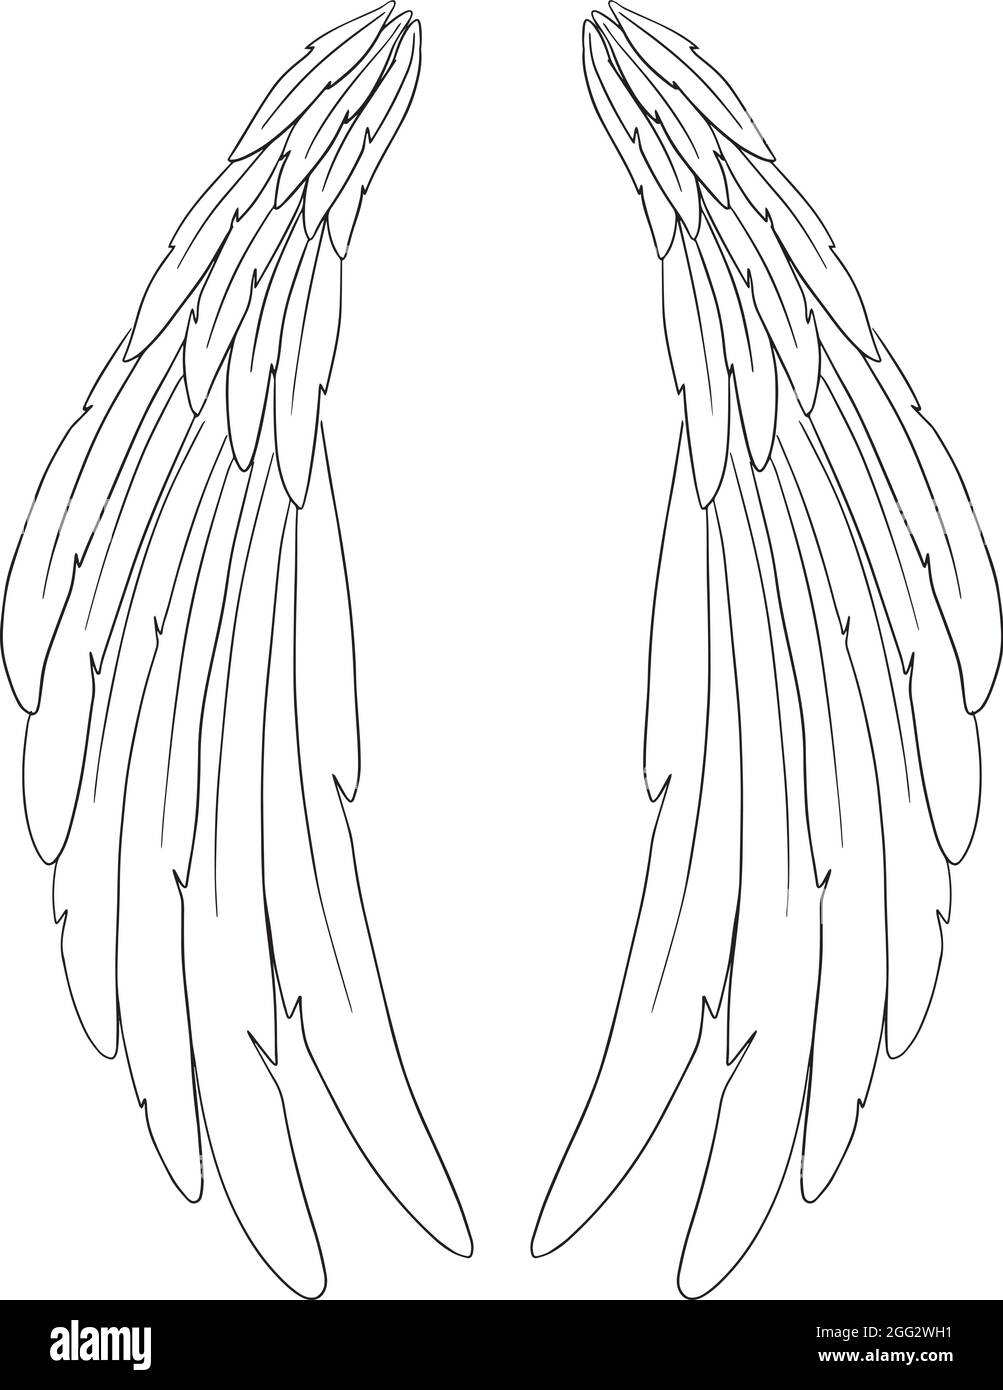 Angel Wings Anime Side View Download  Angel Wings On The Side Png  Free  Transparent PNG Download  PNGkey